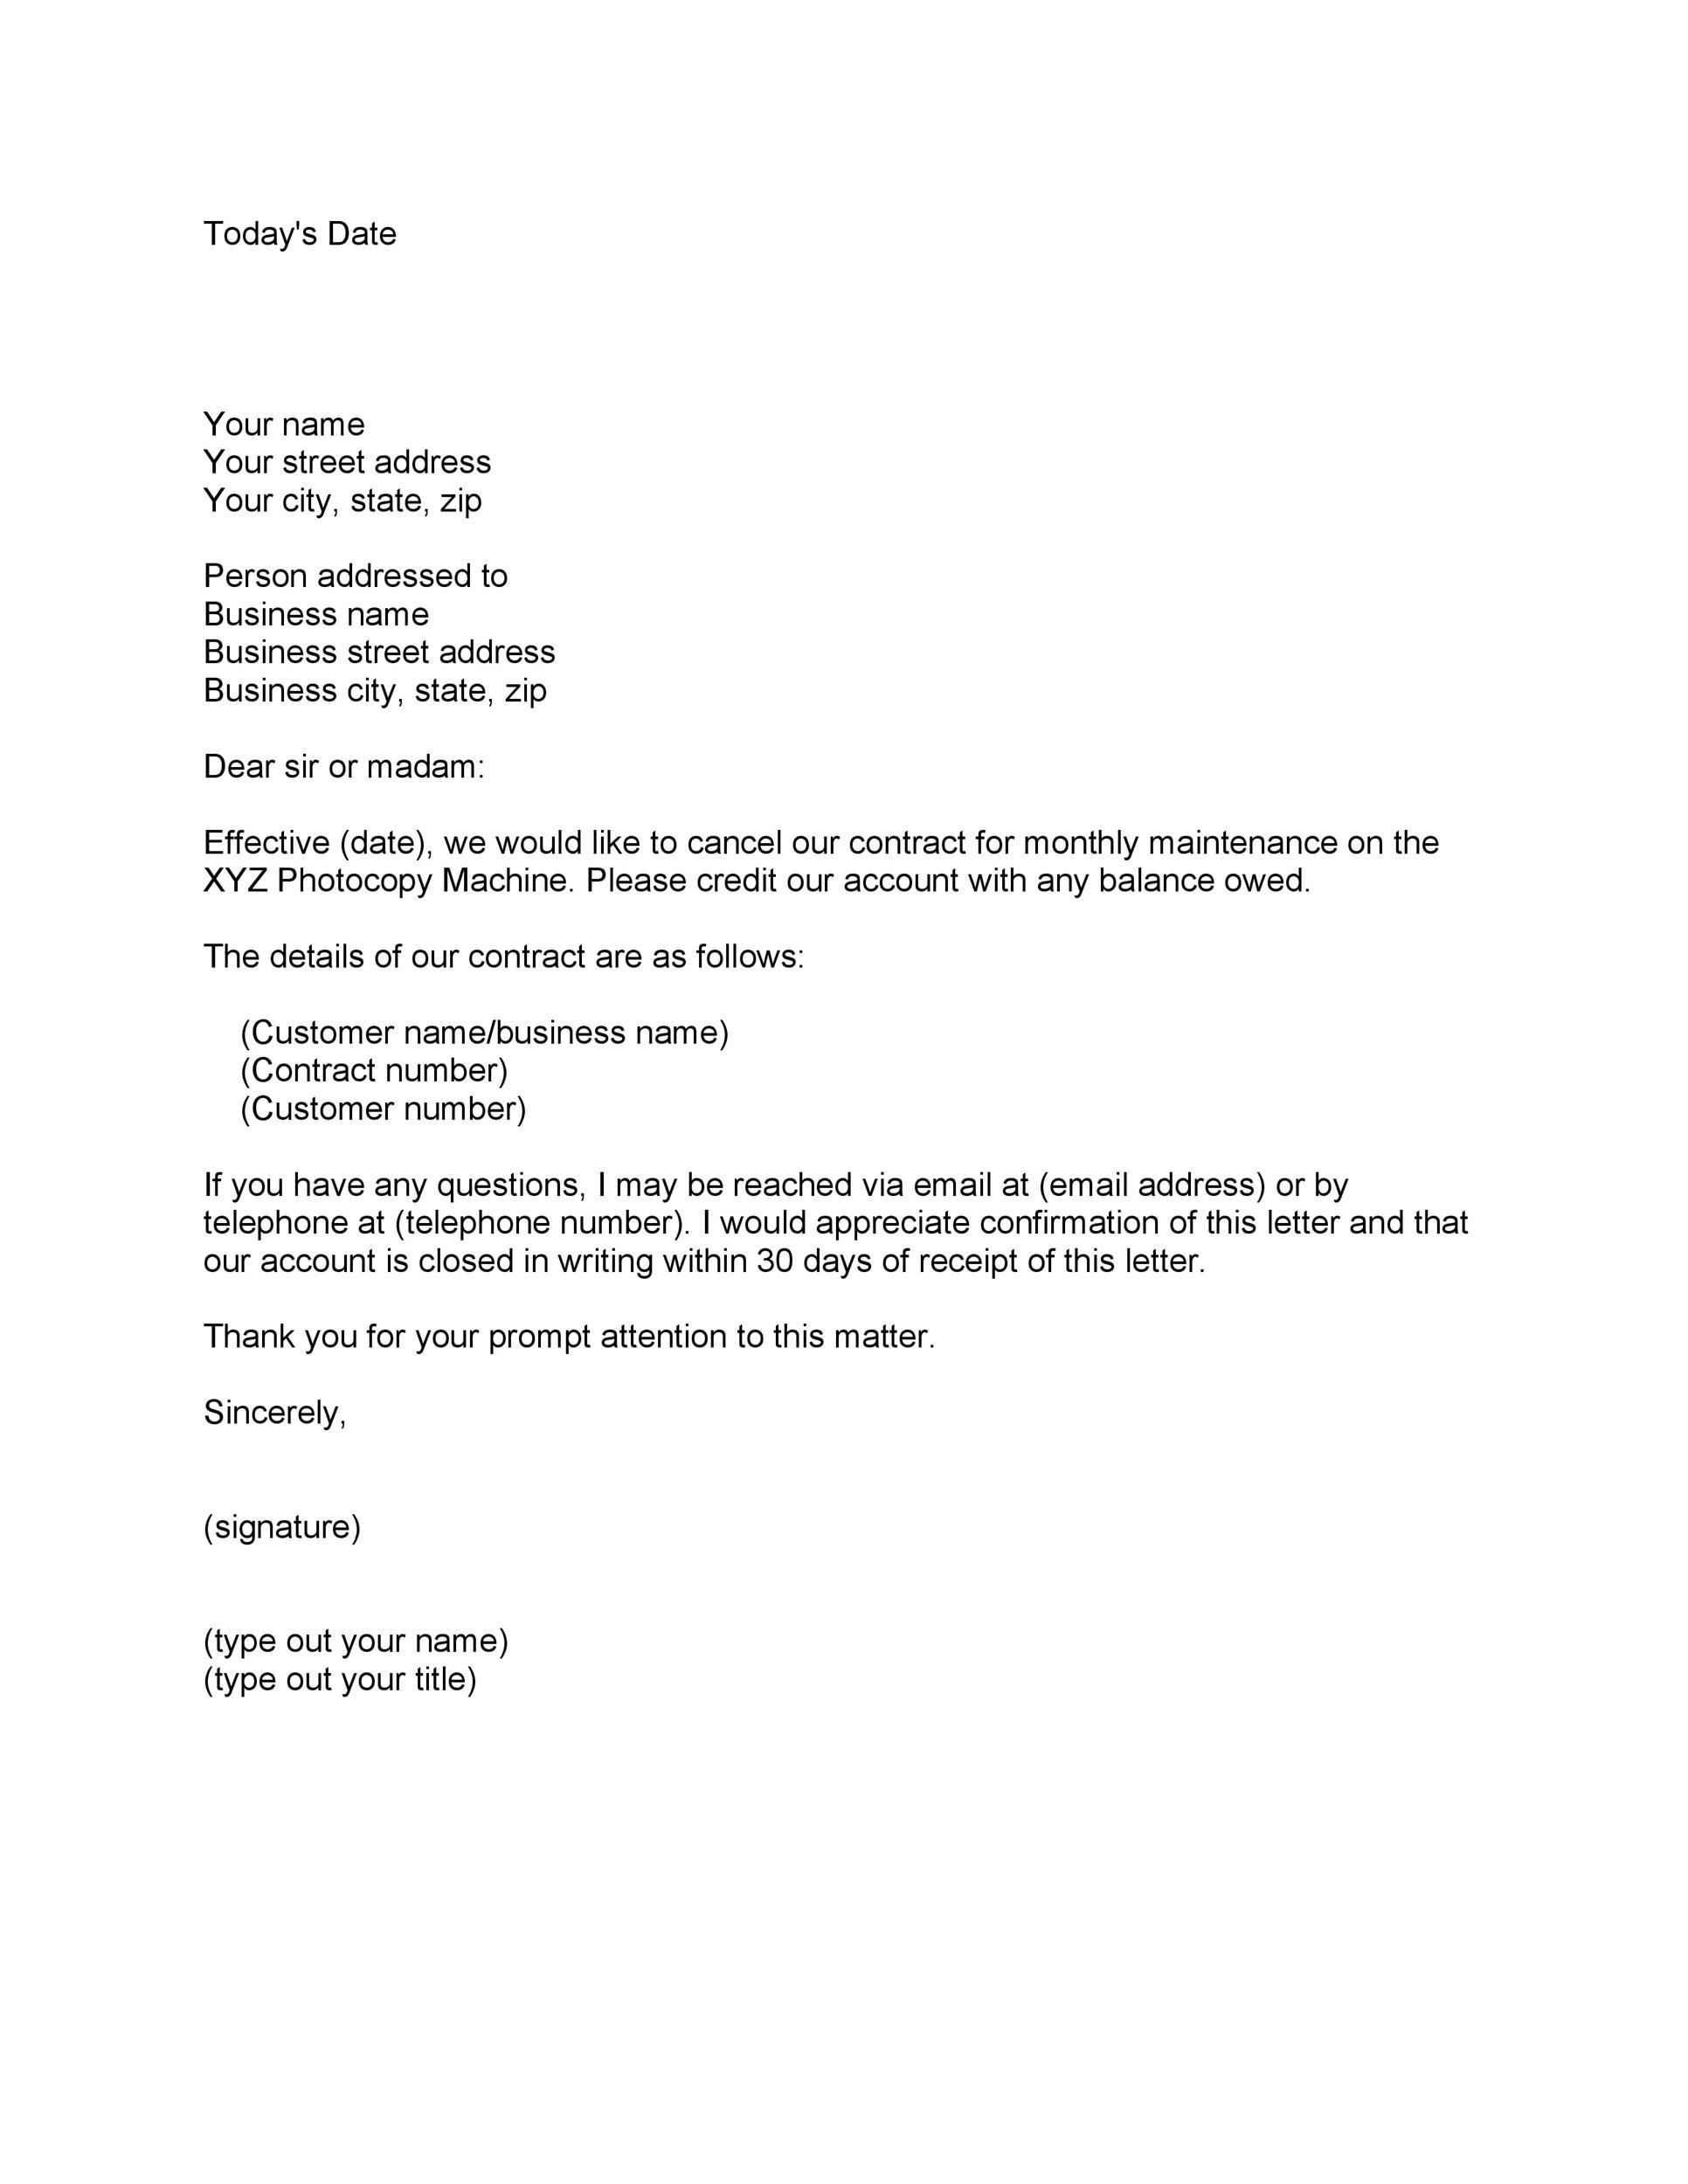 Gym Membership Cancellation Letter Template Free